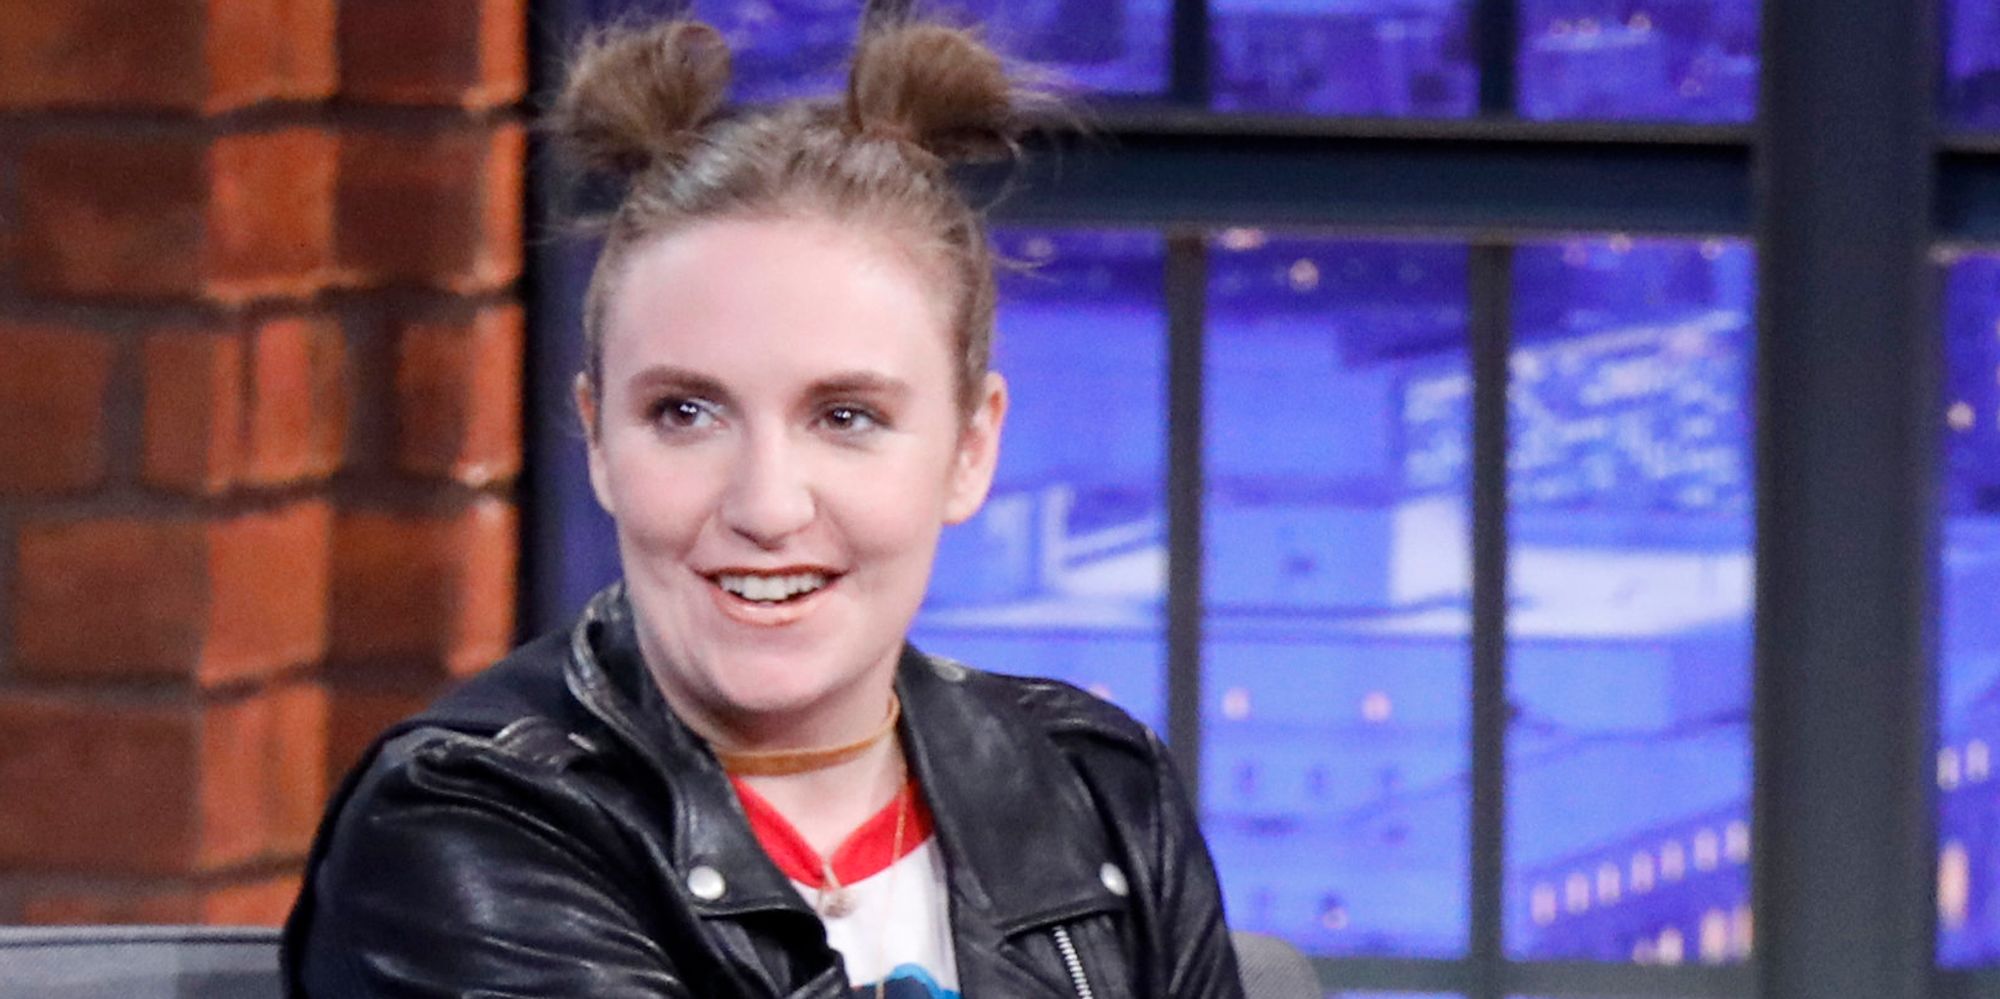 Lena Dunham Had To Go To Physical Therapy After Filming A Sex Scene For 'Girls' - Huffington Post